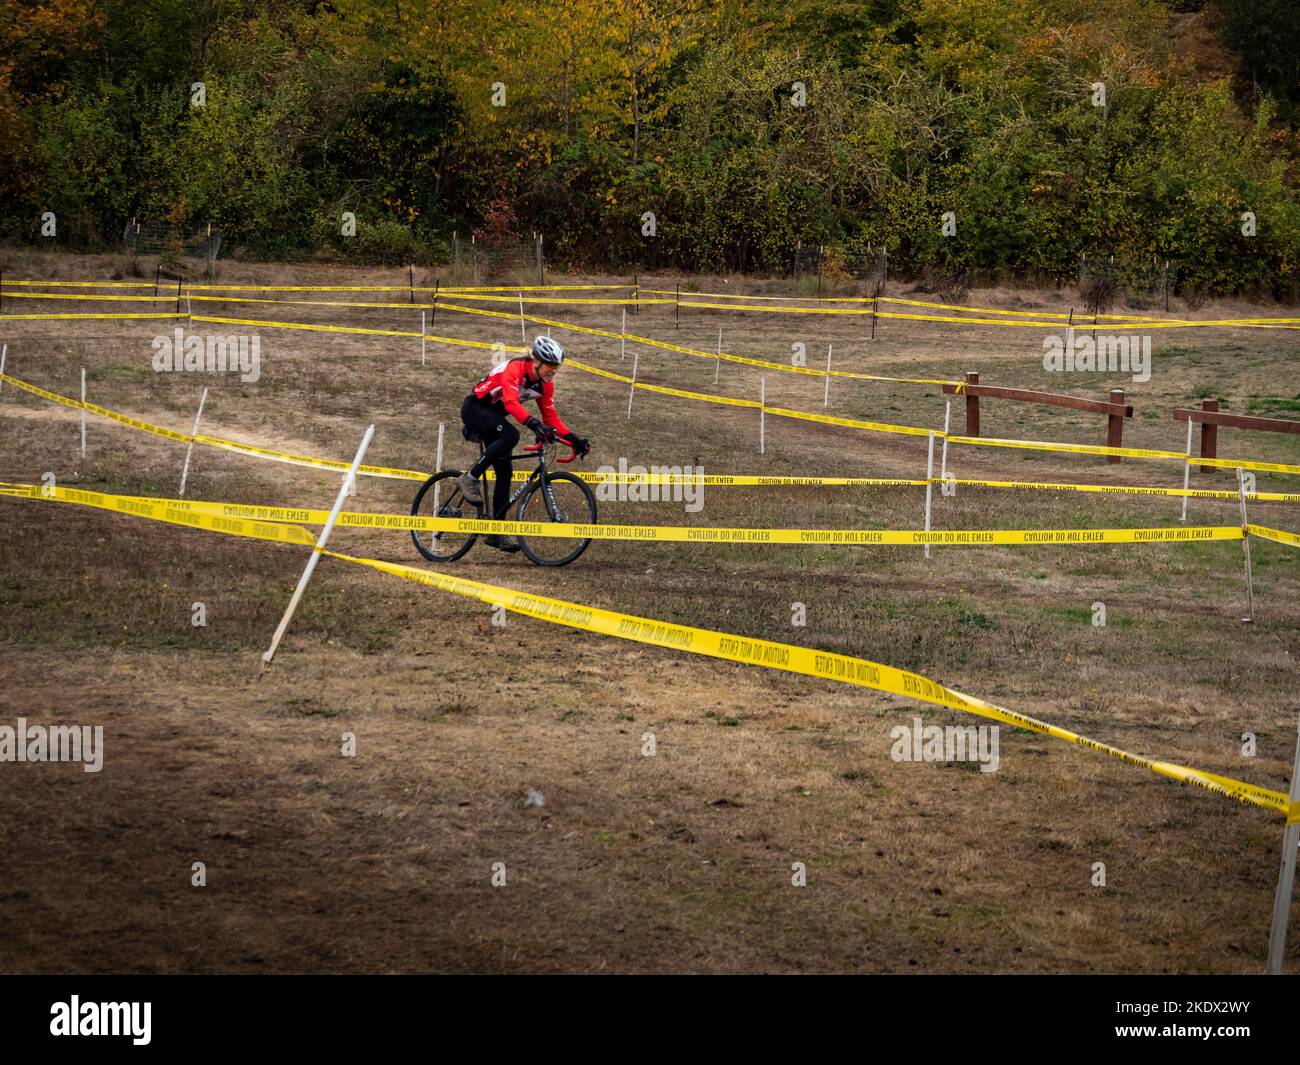 WA22471-00...WASHINGTON - Tom Kirkendall negotiating through a series of twisting turns at the Cross Revulsion Fort Steilacoom cyclocross race in Lake Stock Photo